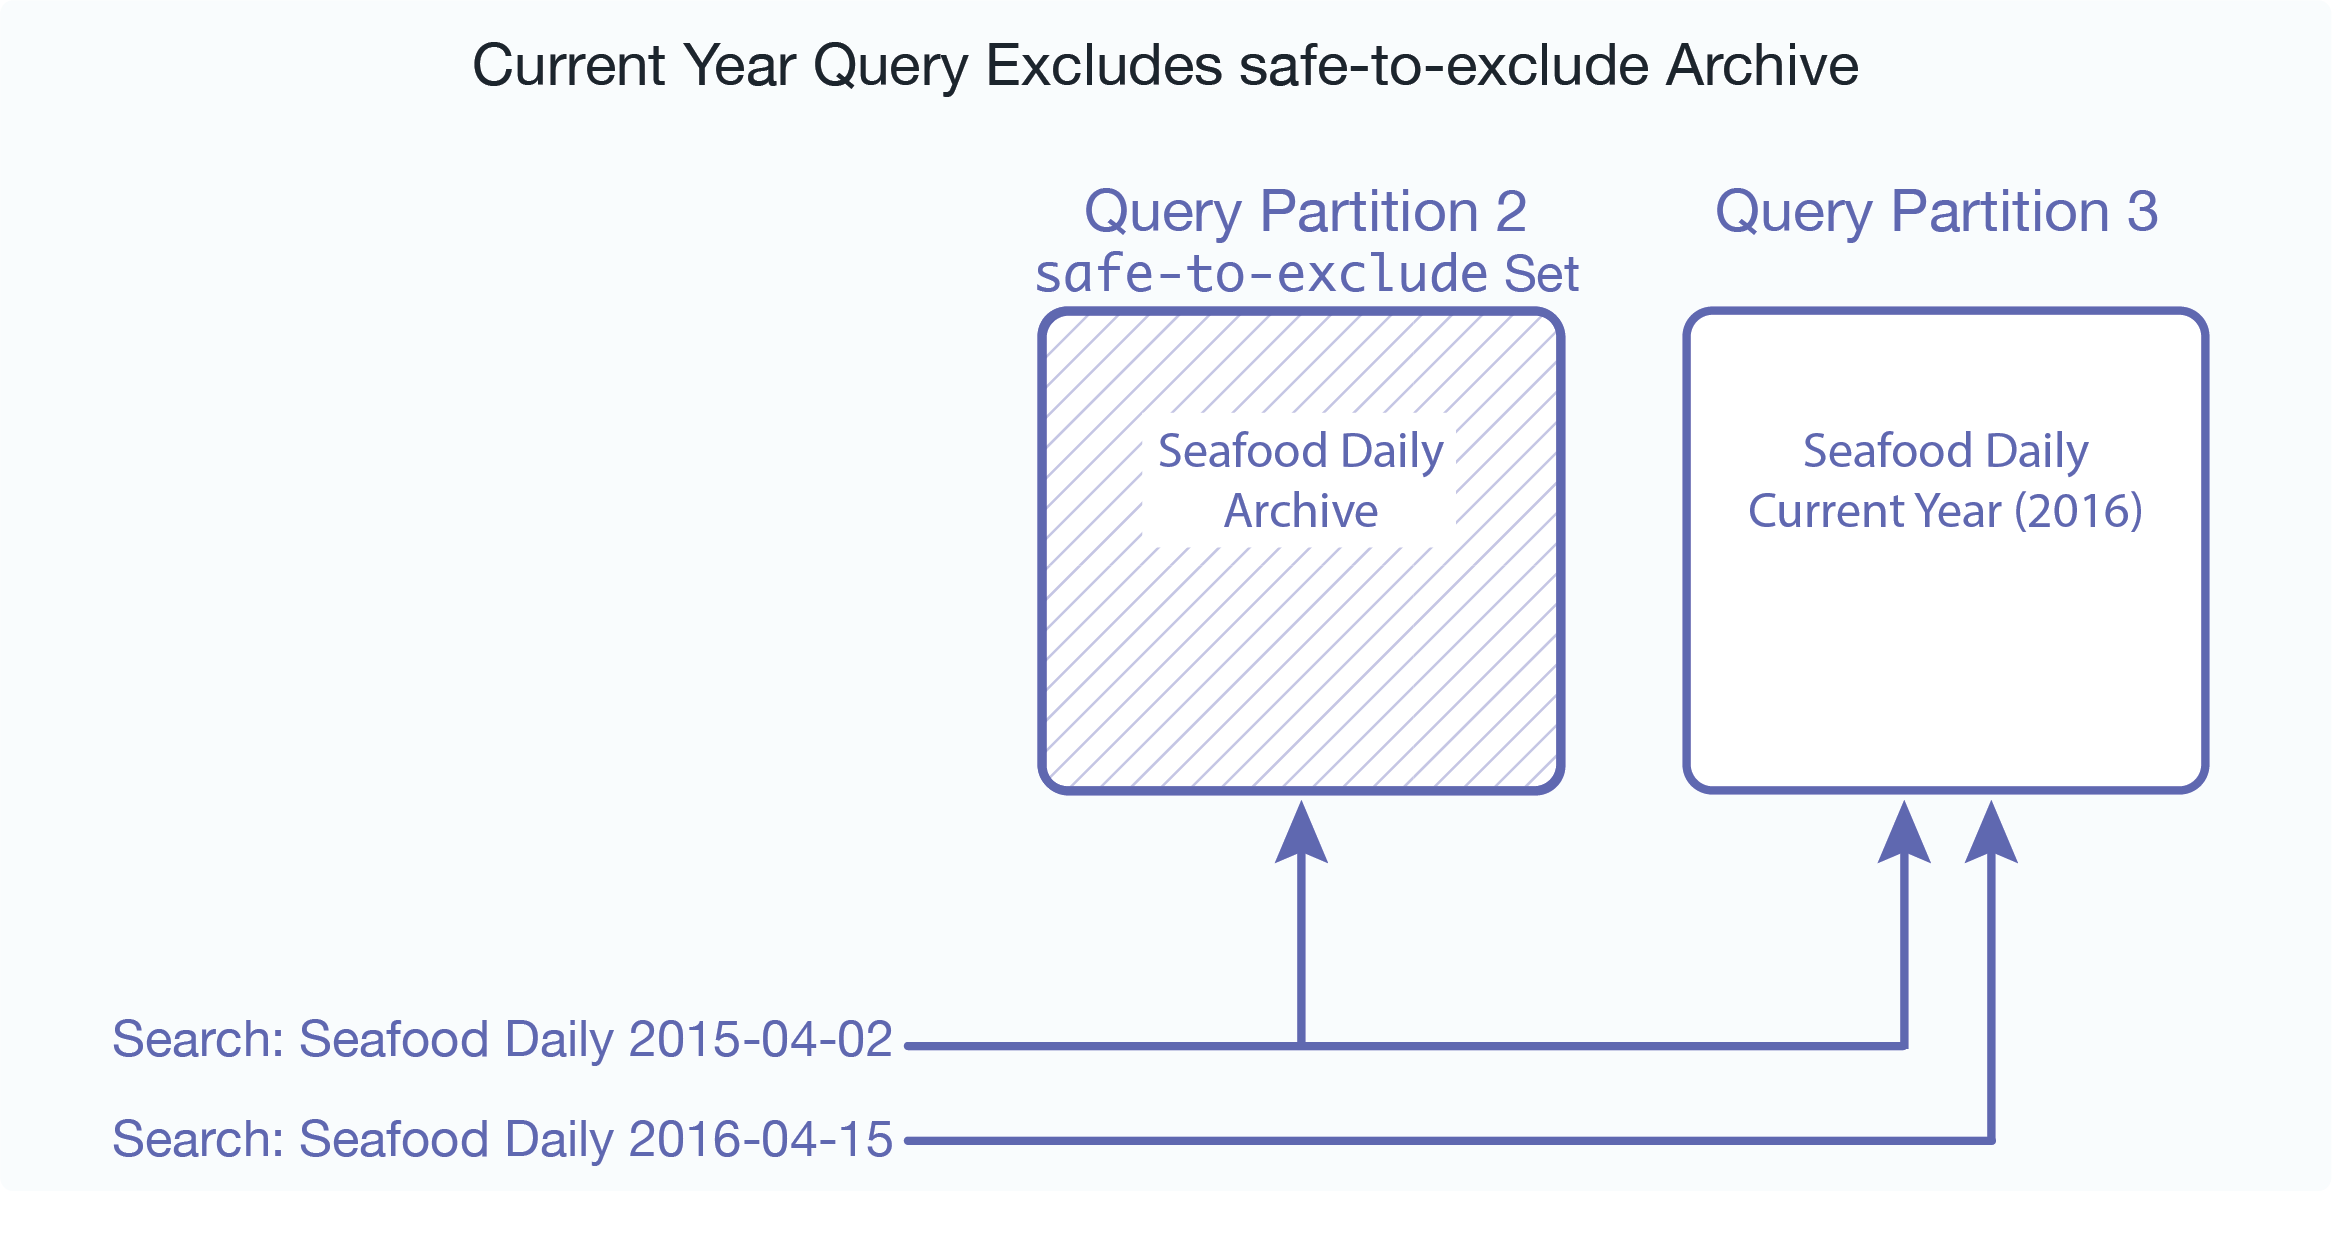 Illustration showing two query partitions that hold the documents, “Seafood Daily,” The query assignment policy for each compares the date of the document with the current date and sorts the documents so that one partition contains the issues from the current year and the other archives the issues from previous years. The query partition serving as the archive is set to safe-to-exclude and the query partition containing this year’s issues is not set with this option.